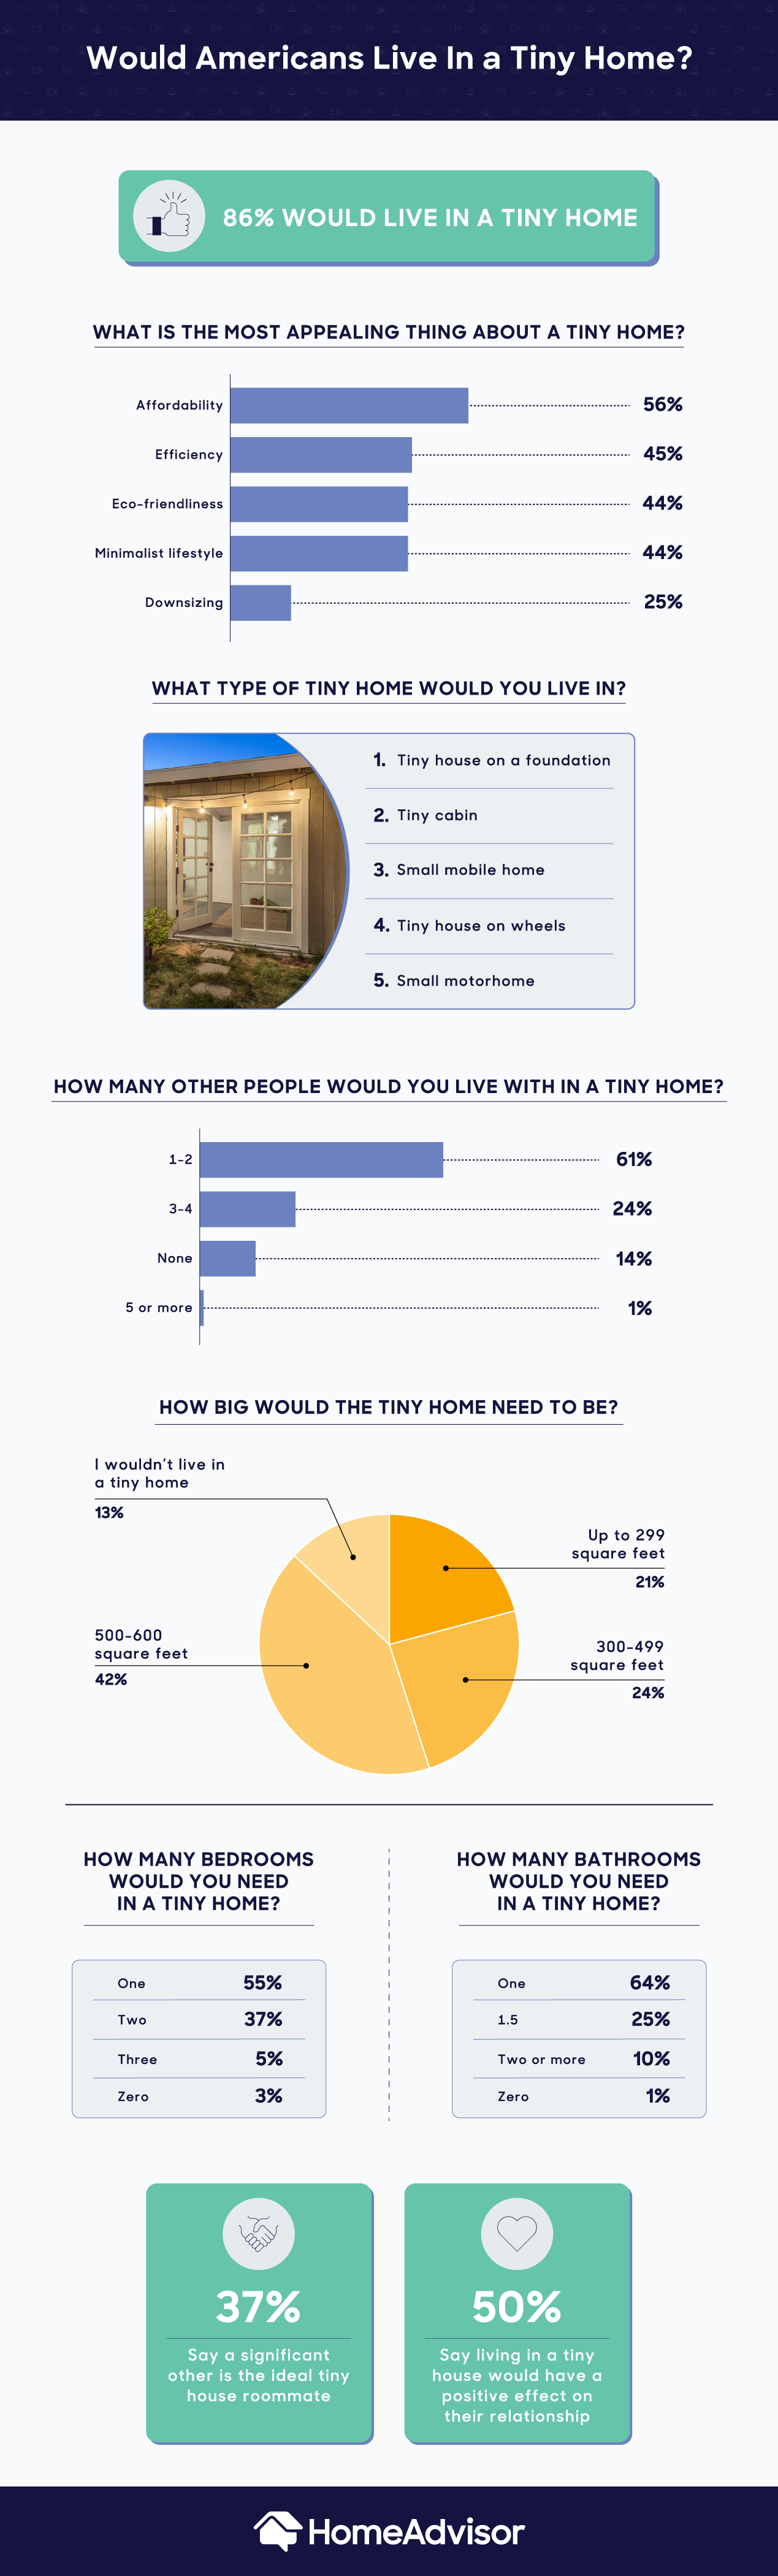 why do americans want to live in a tiny home